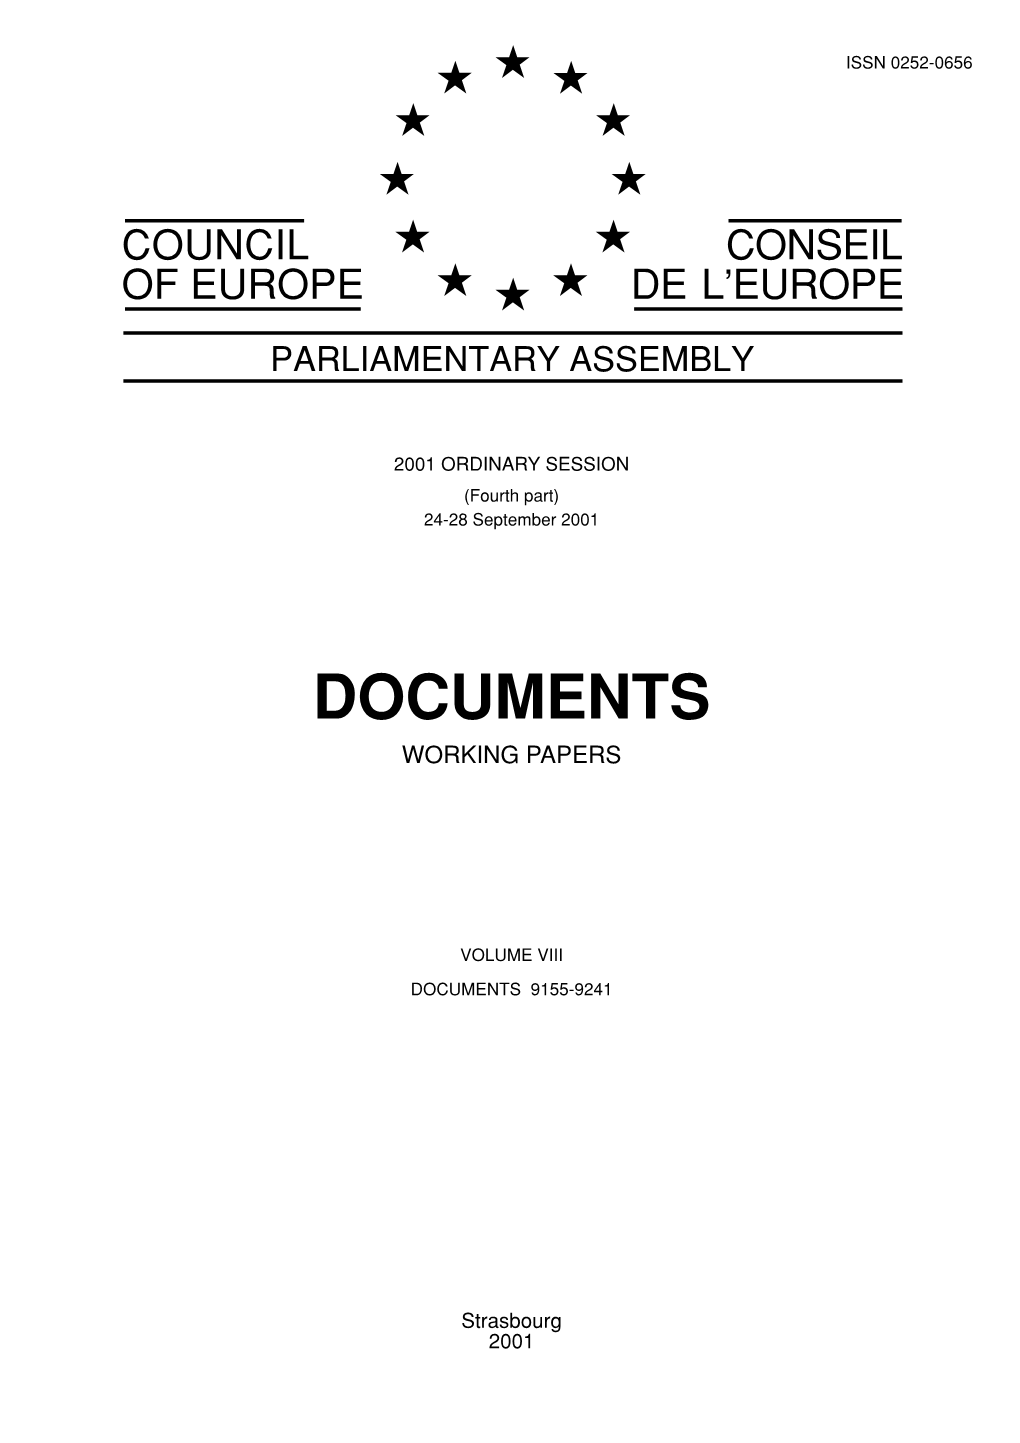 Documents Working Papers